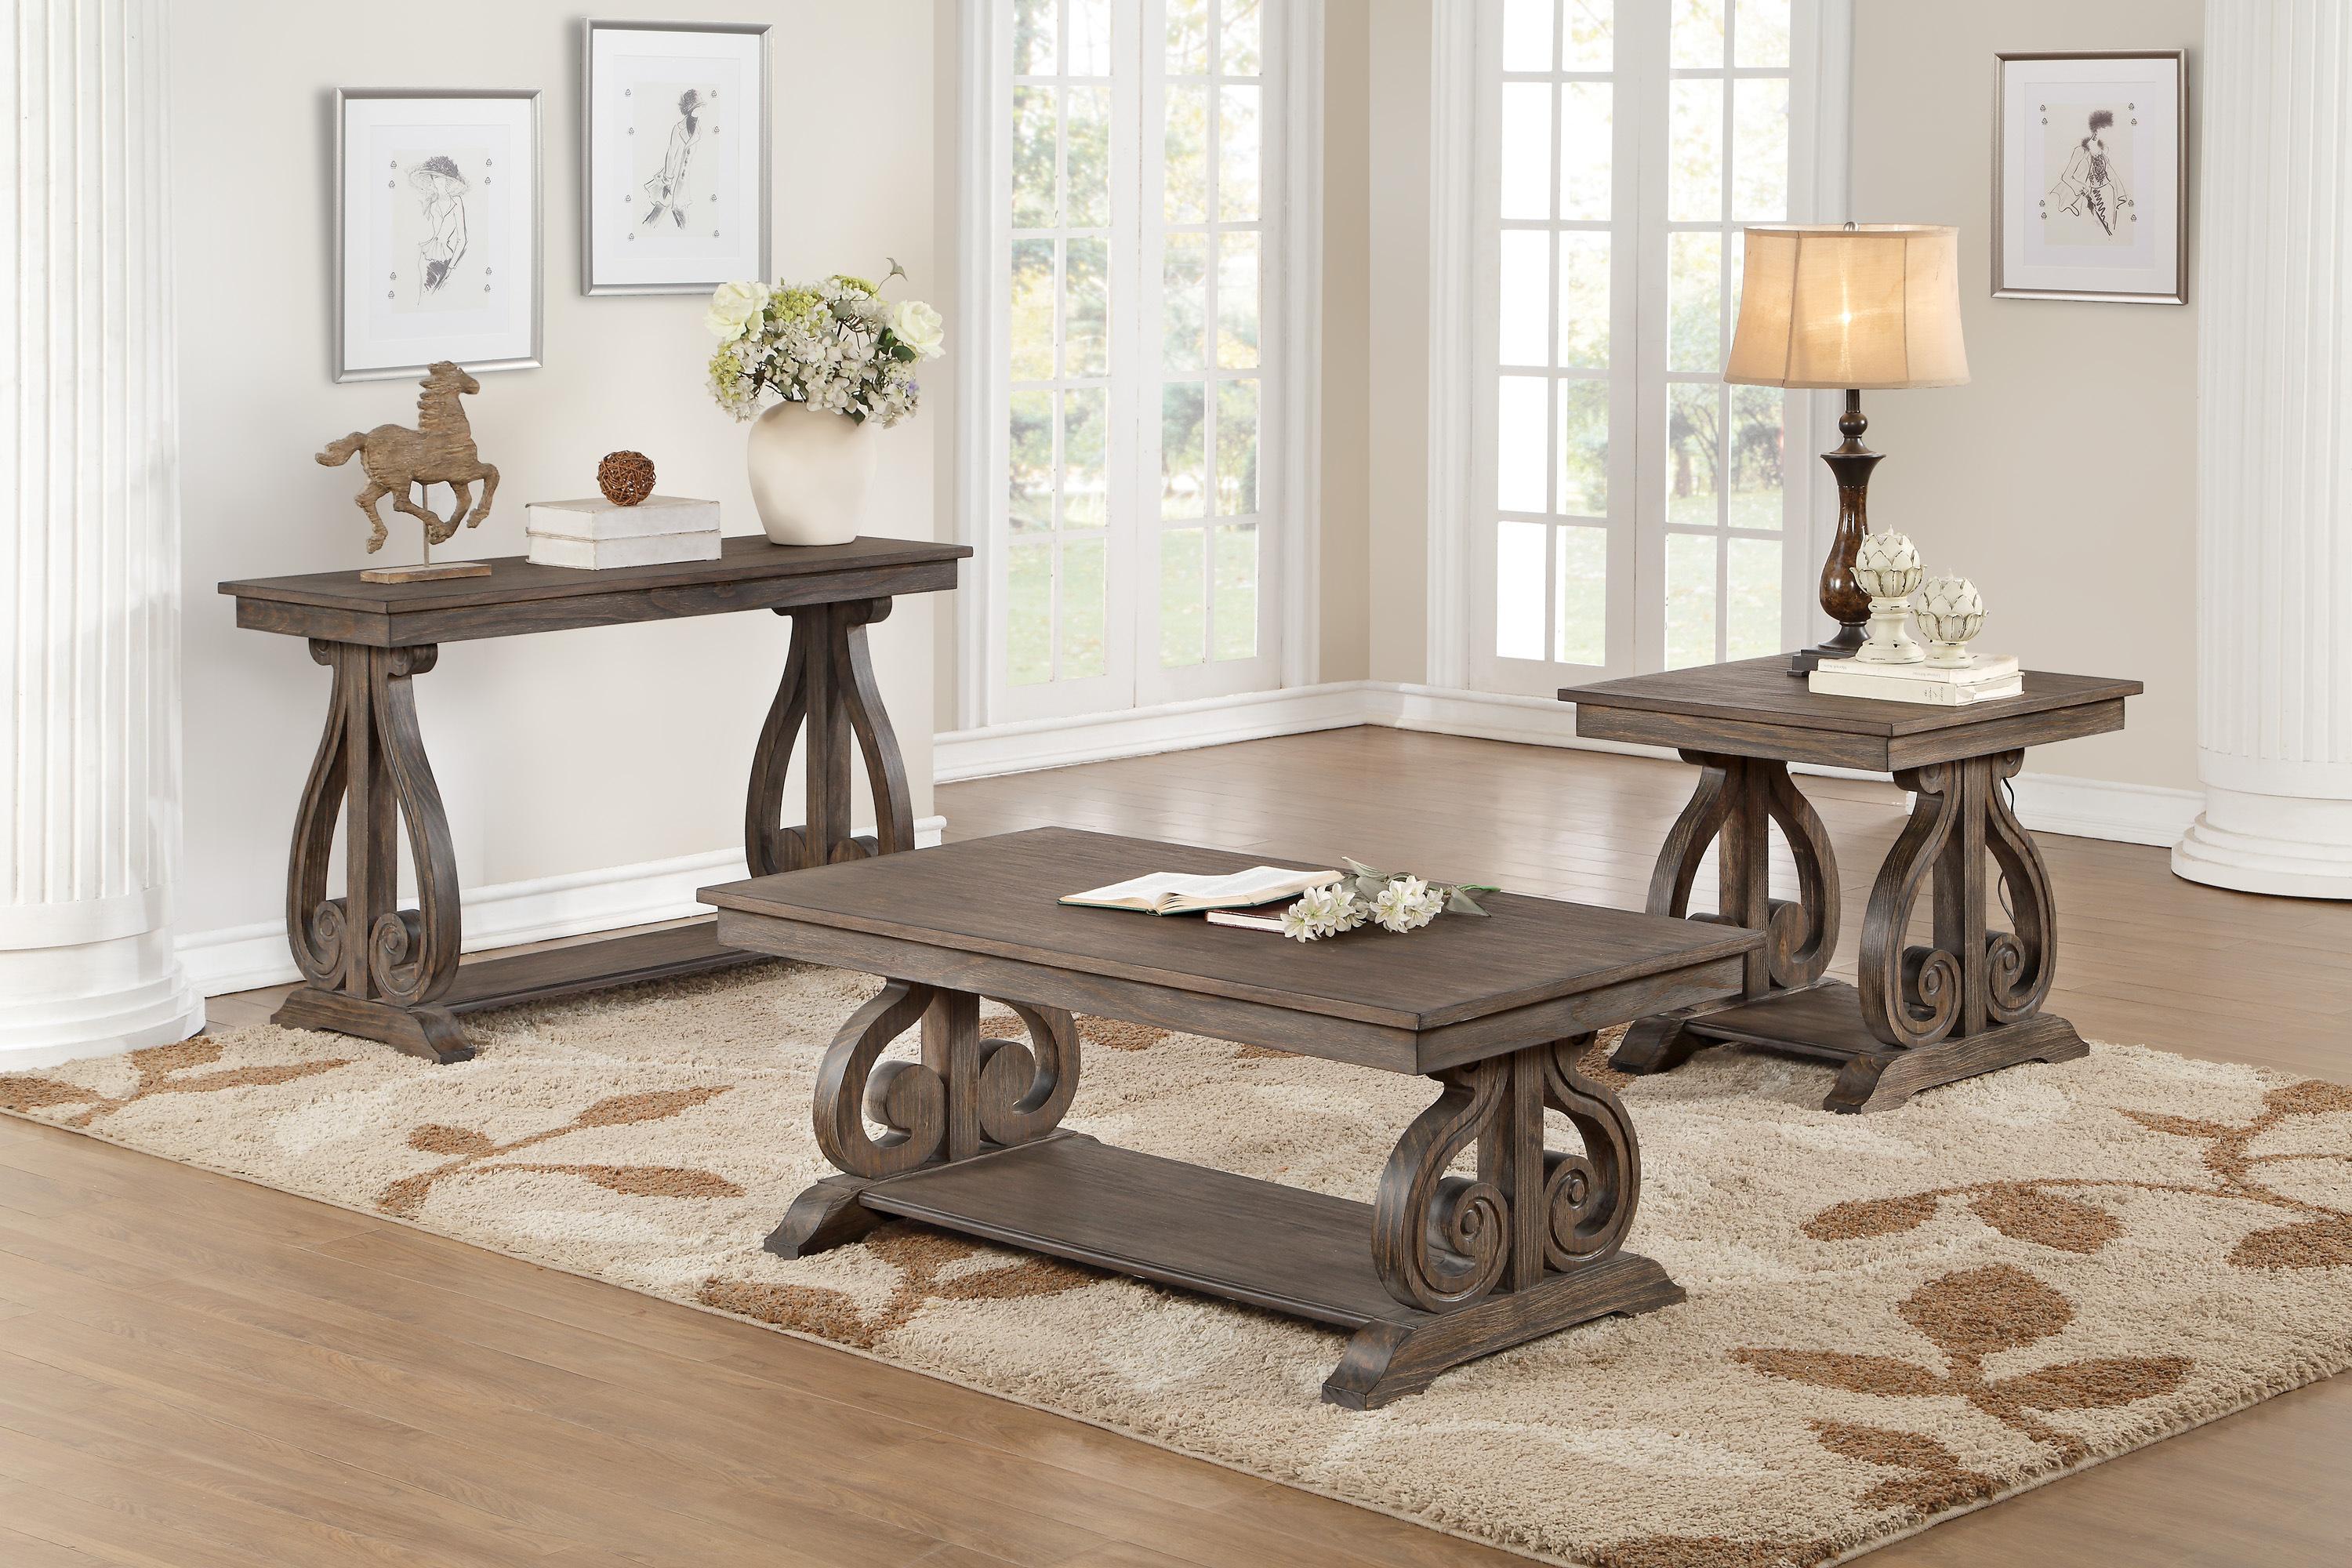 Cottage Occasional Table Set 5438-3PC Toulon 5438-3PC in Dark Oak 